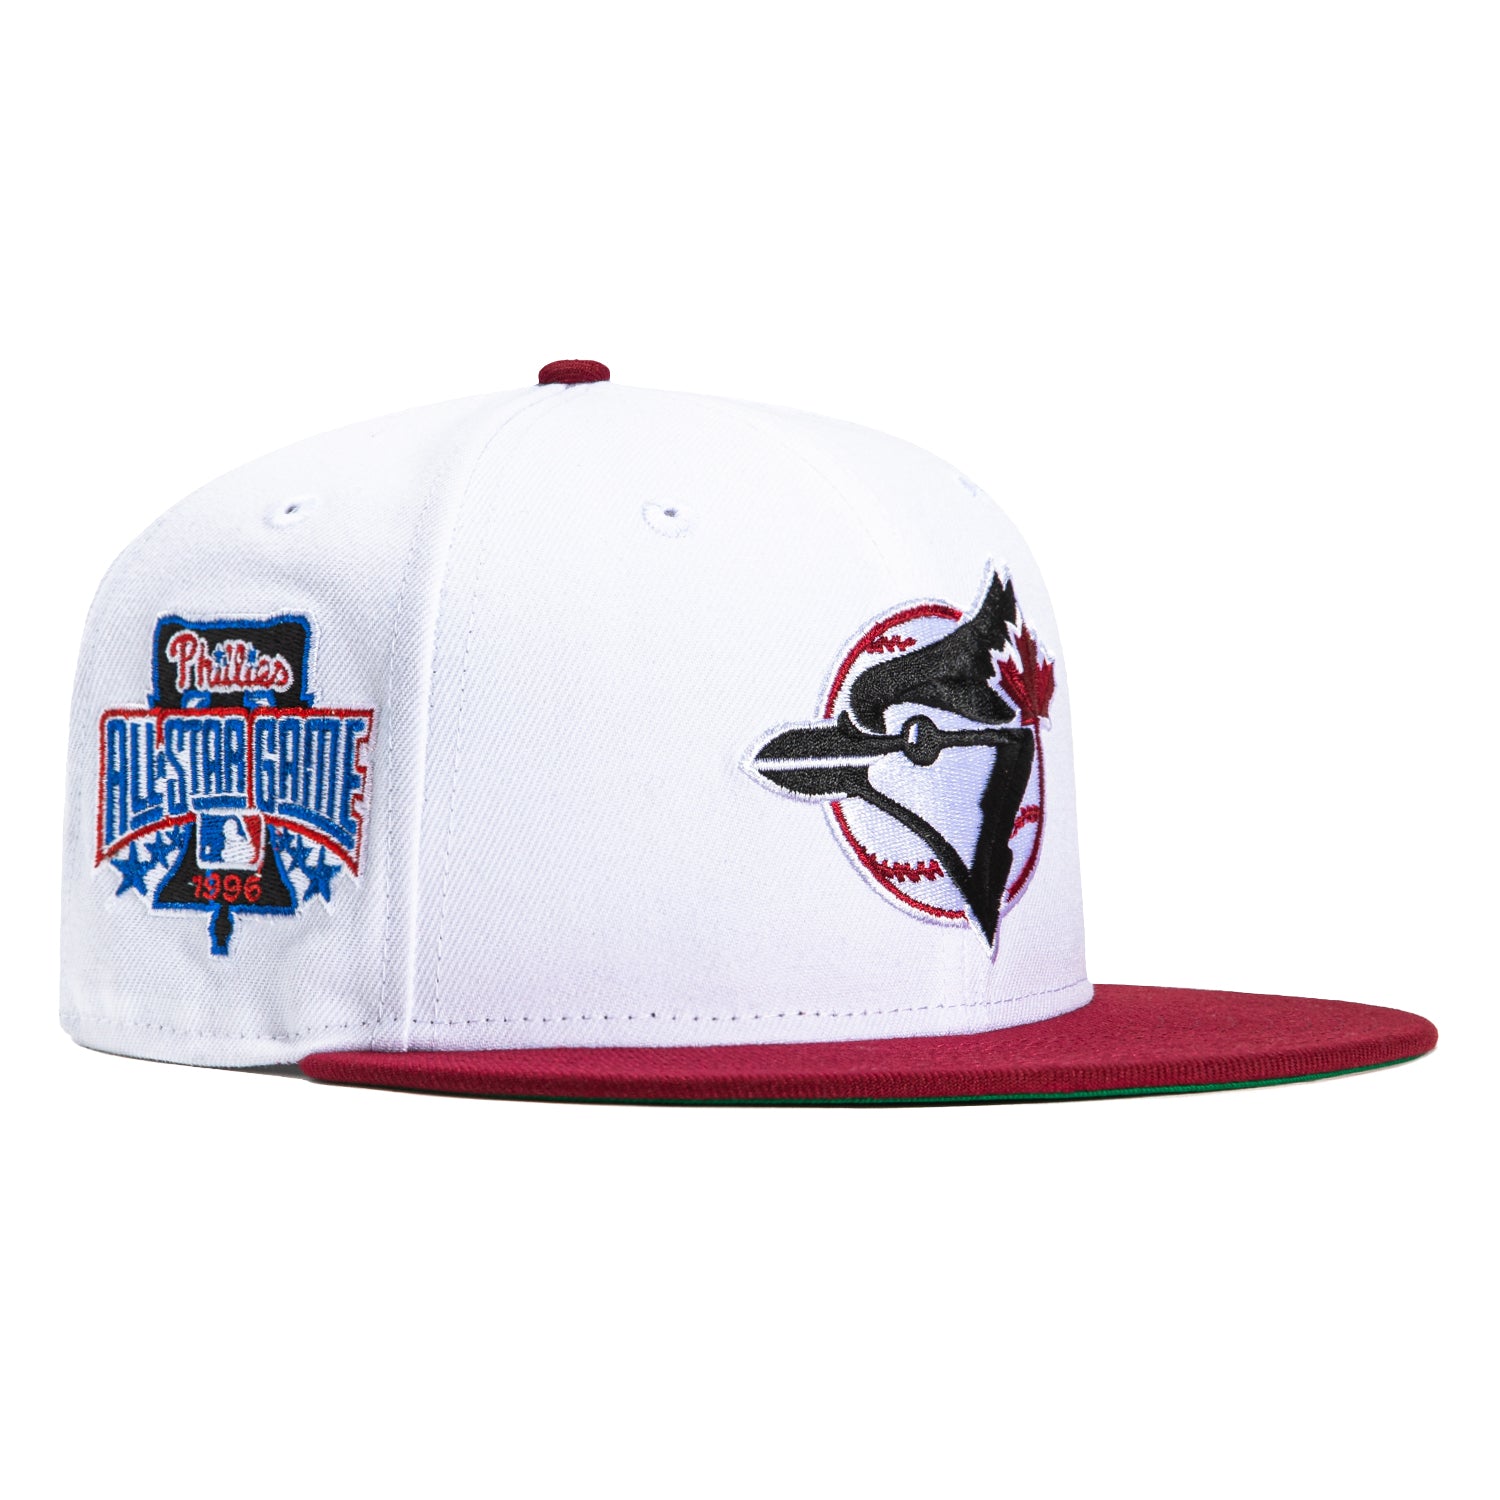 New Era 59Fifty Toronto Blue Jays 1996 All Star Game Patch Hat